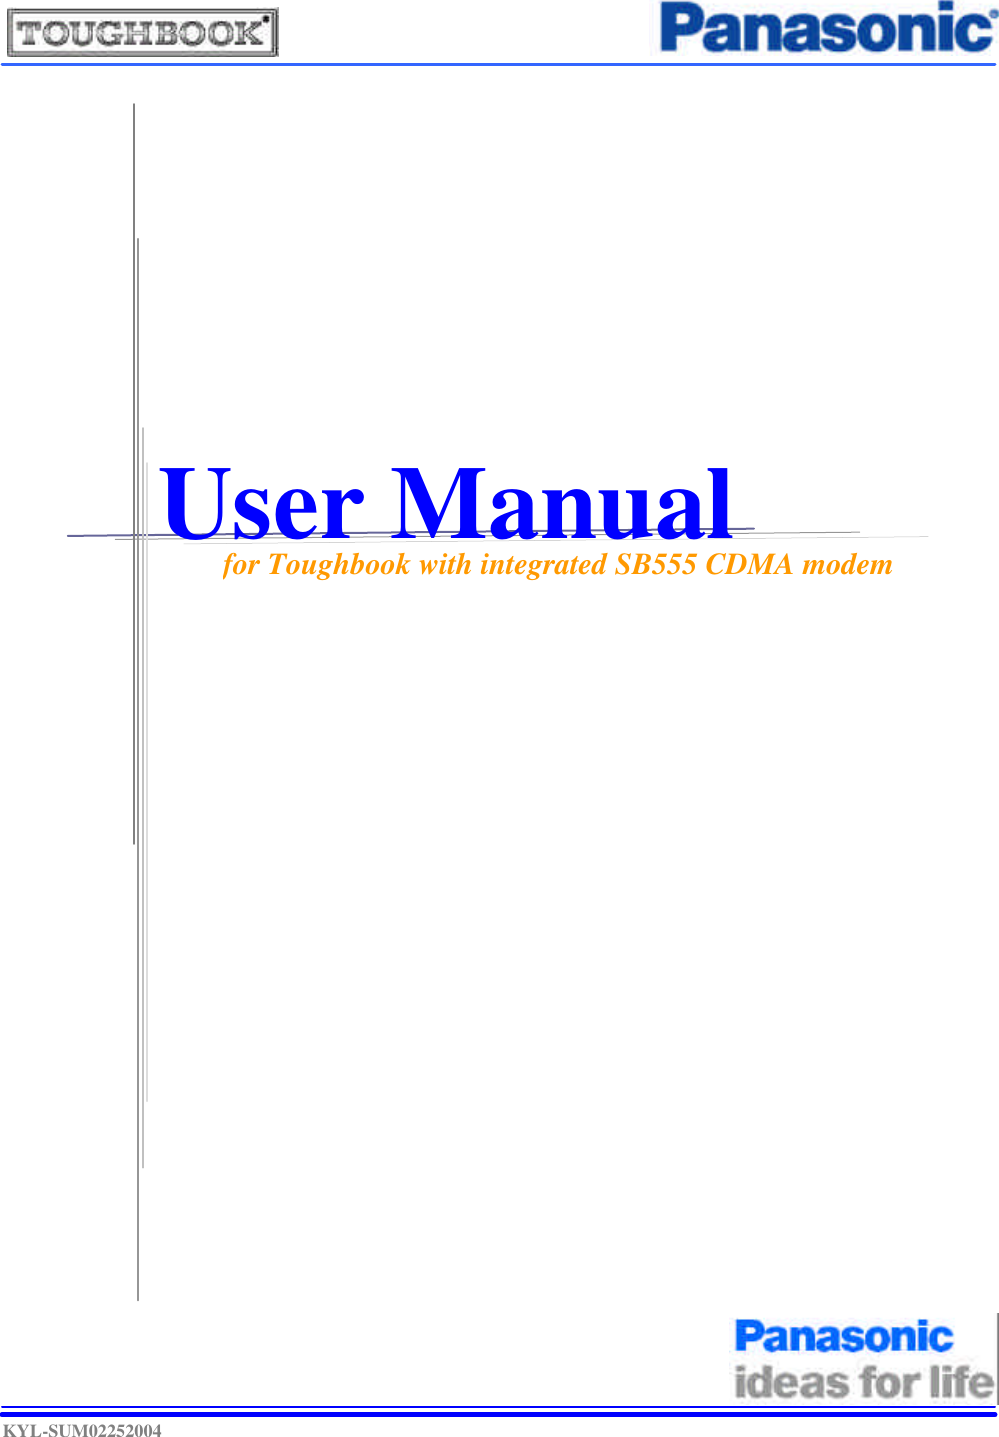  KYL-SUM02252004                     User Manual                                                                                  for Toughbook with integrated SB555 CDMA modem 